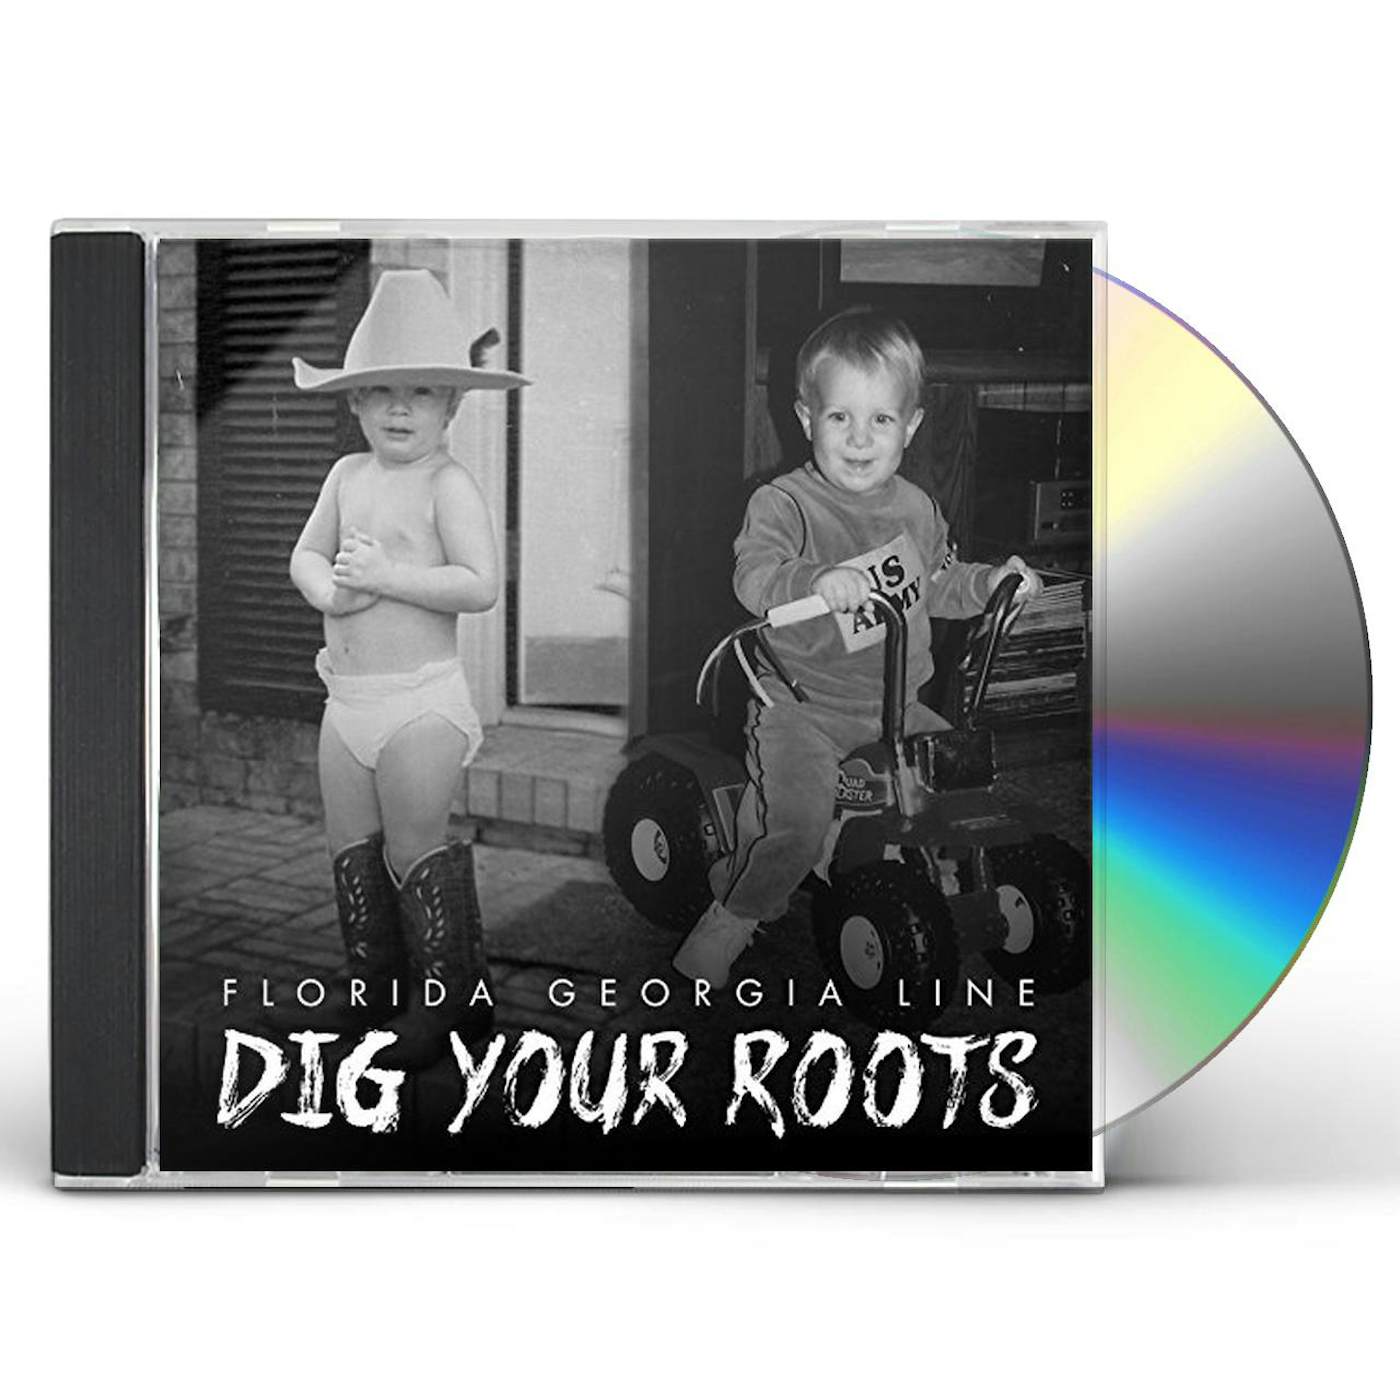 Florida Georgia Line DIG YOUR ROOTS CD